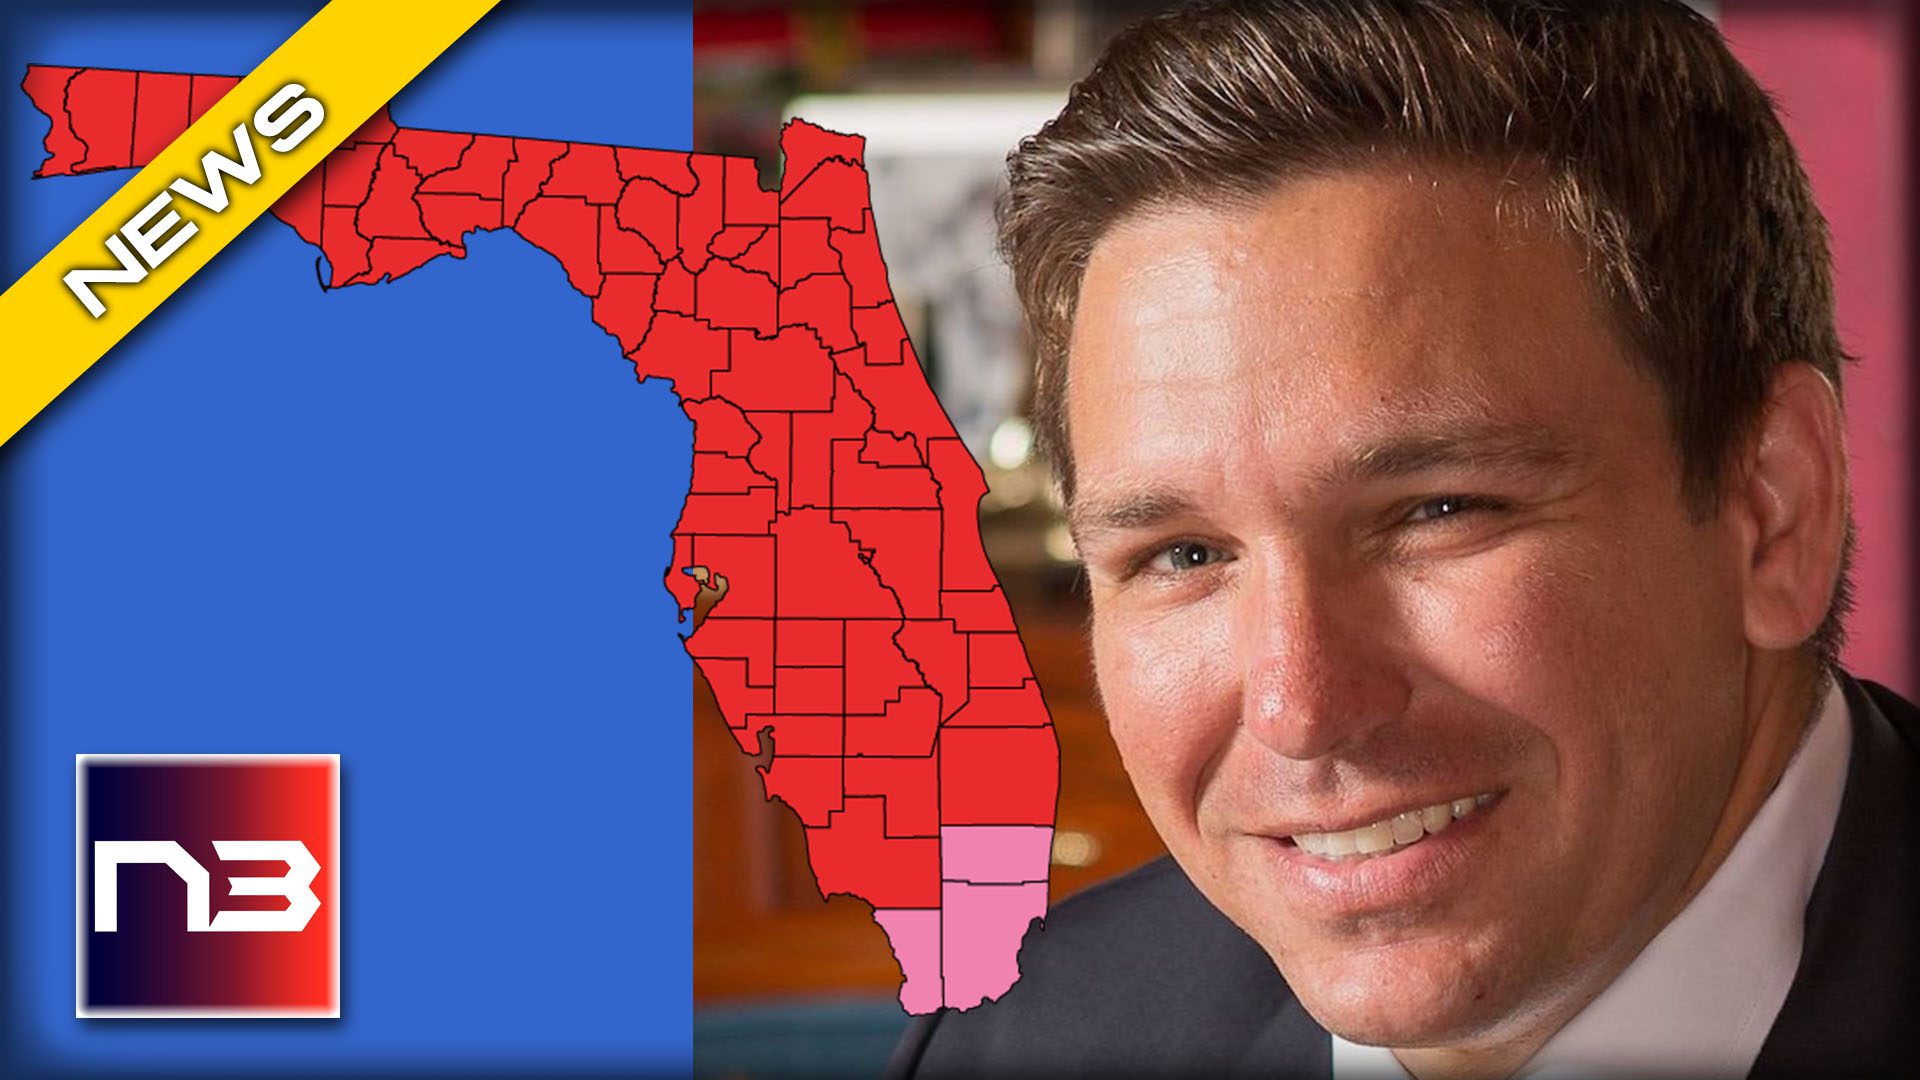 WHOA! Dems MORTIFIED As MASSIVE SURGE Set To Propel Desantis into the STRATOSPHERE